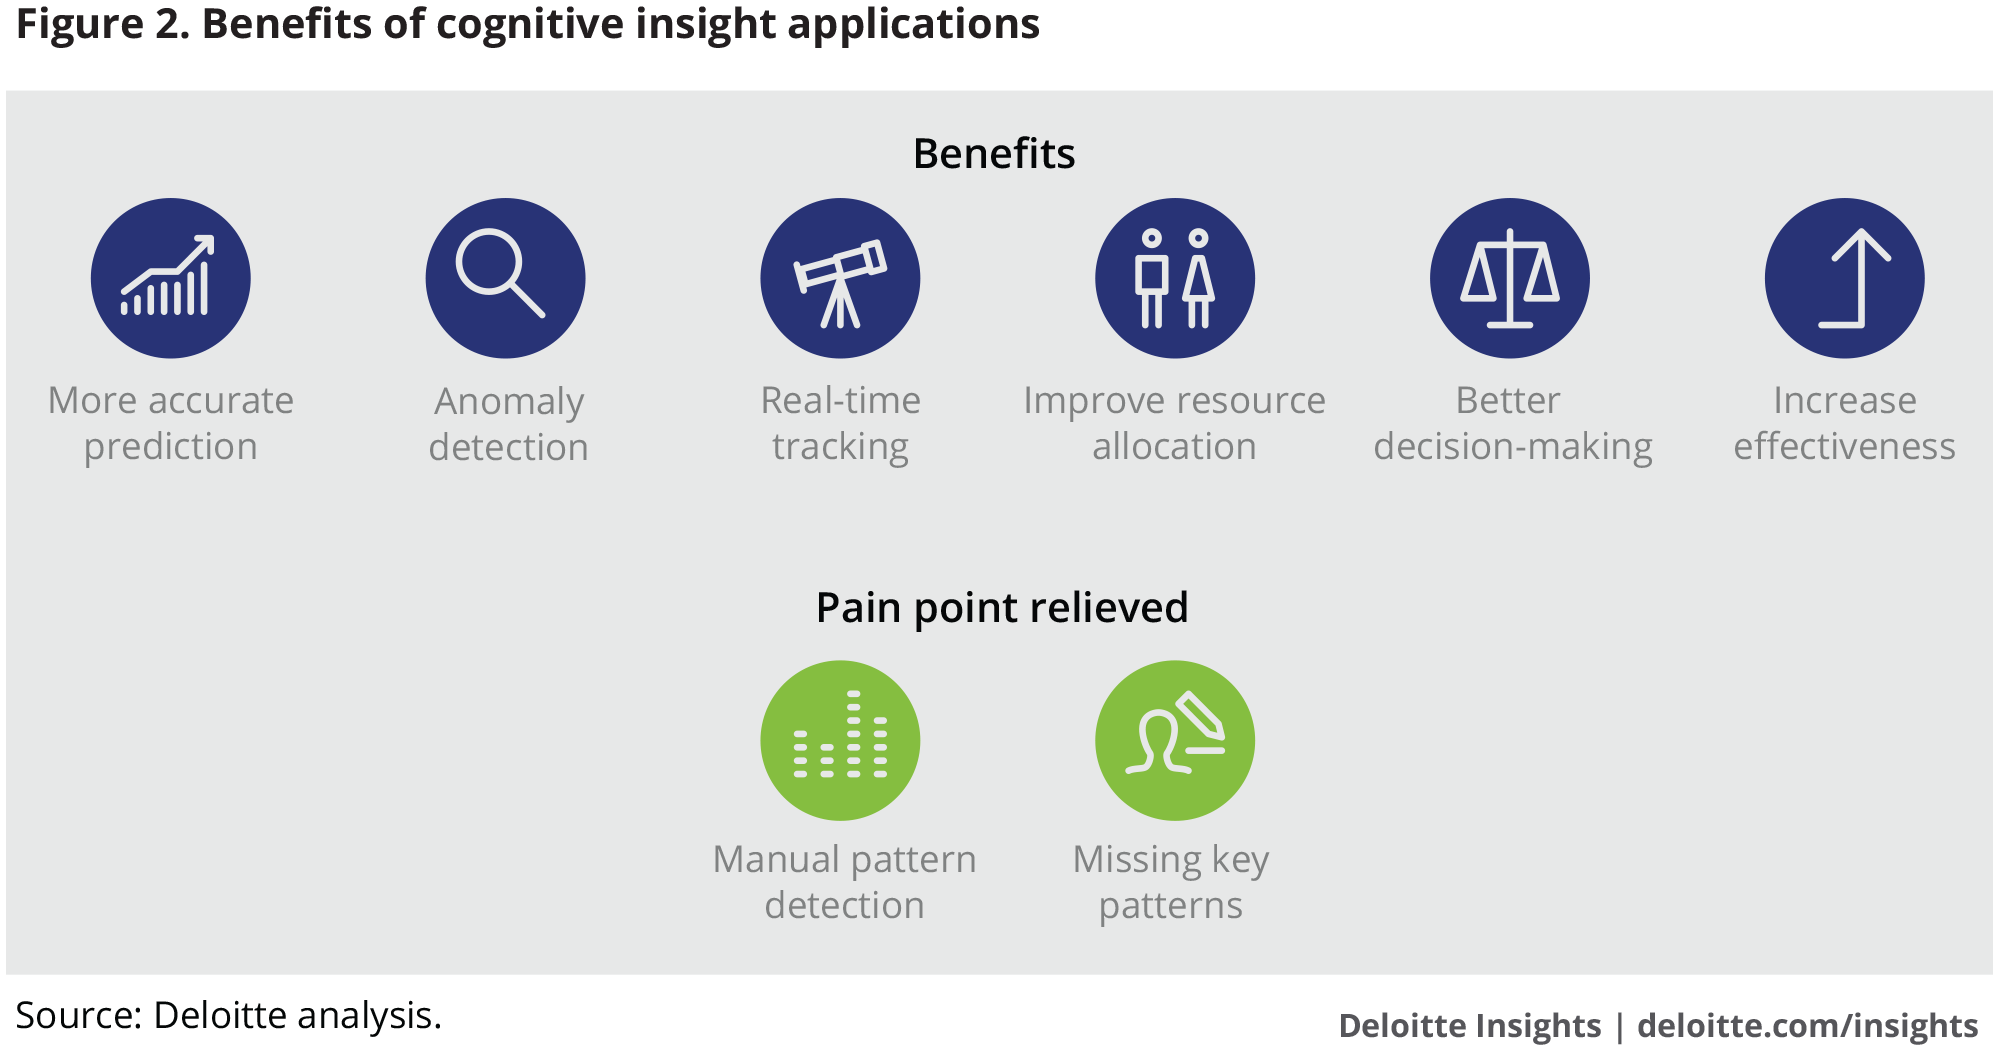 Benefits of cognitive insight applications